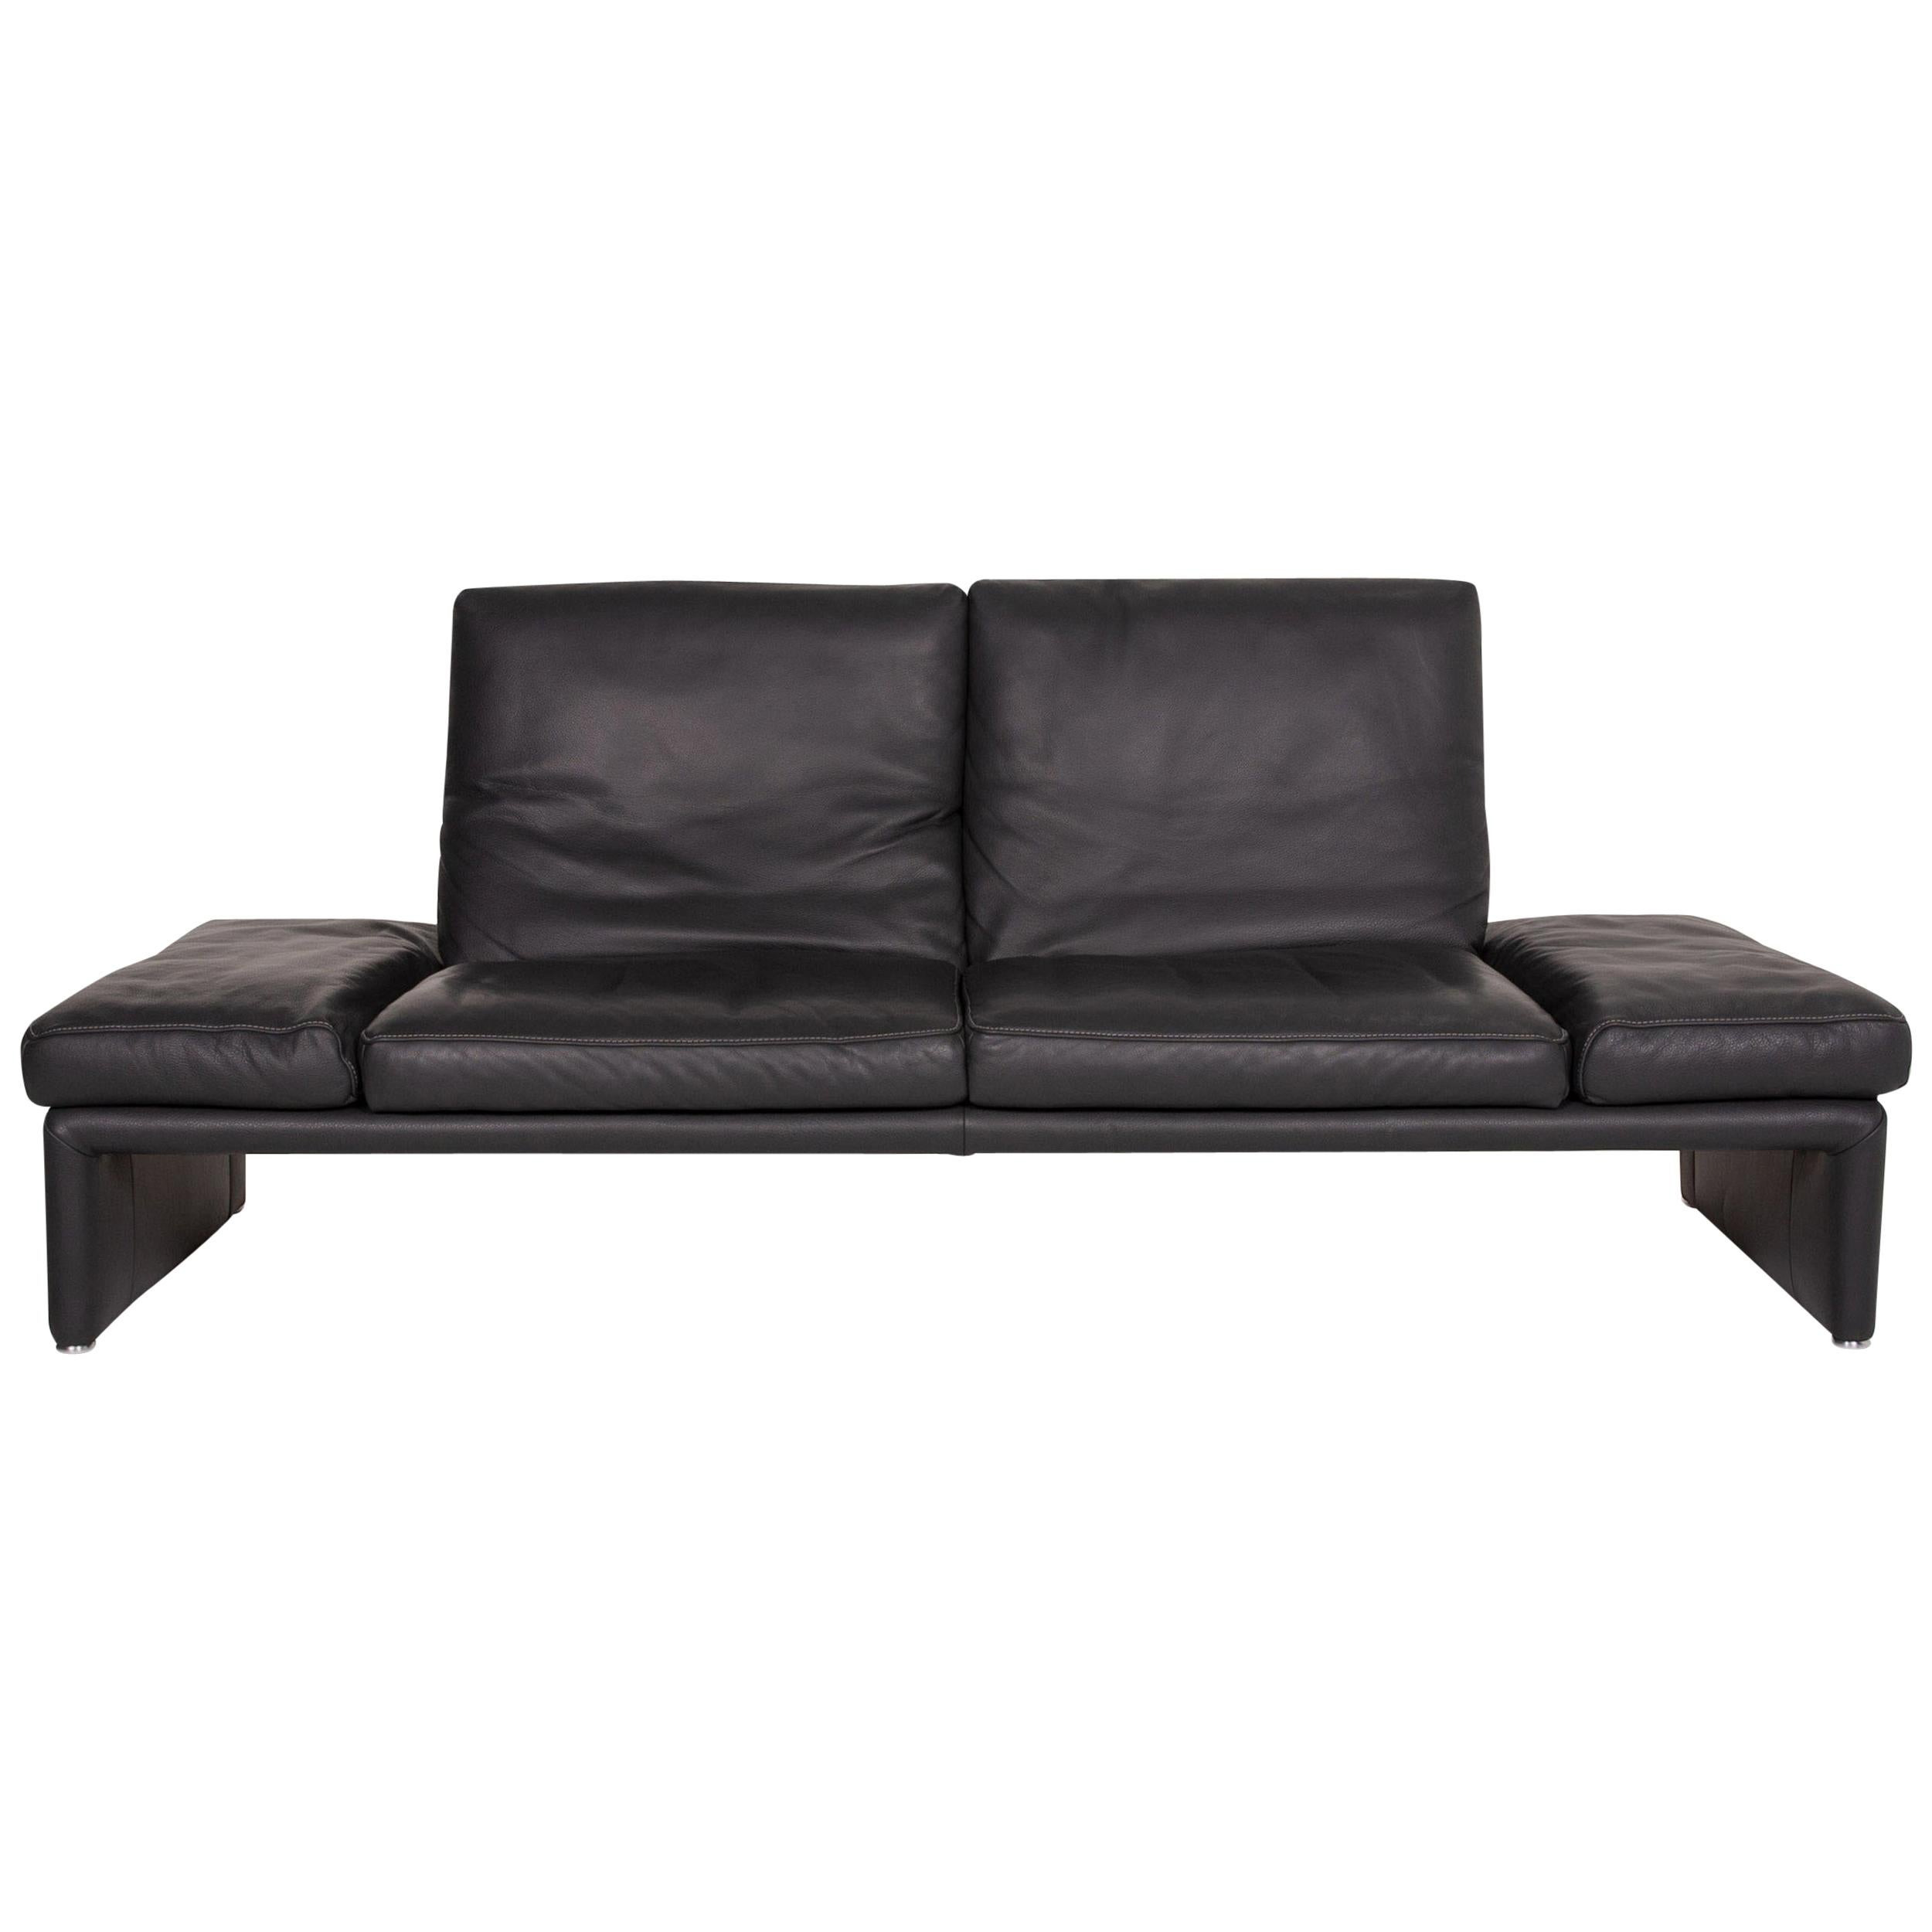 Koinor Raoul Leather Sofa Anthracite Two-Seat Function For Sale